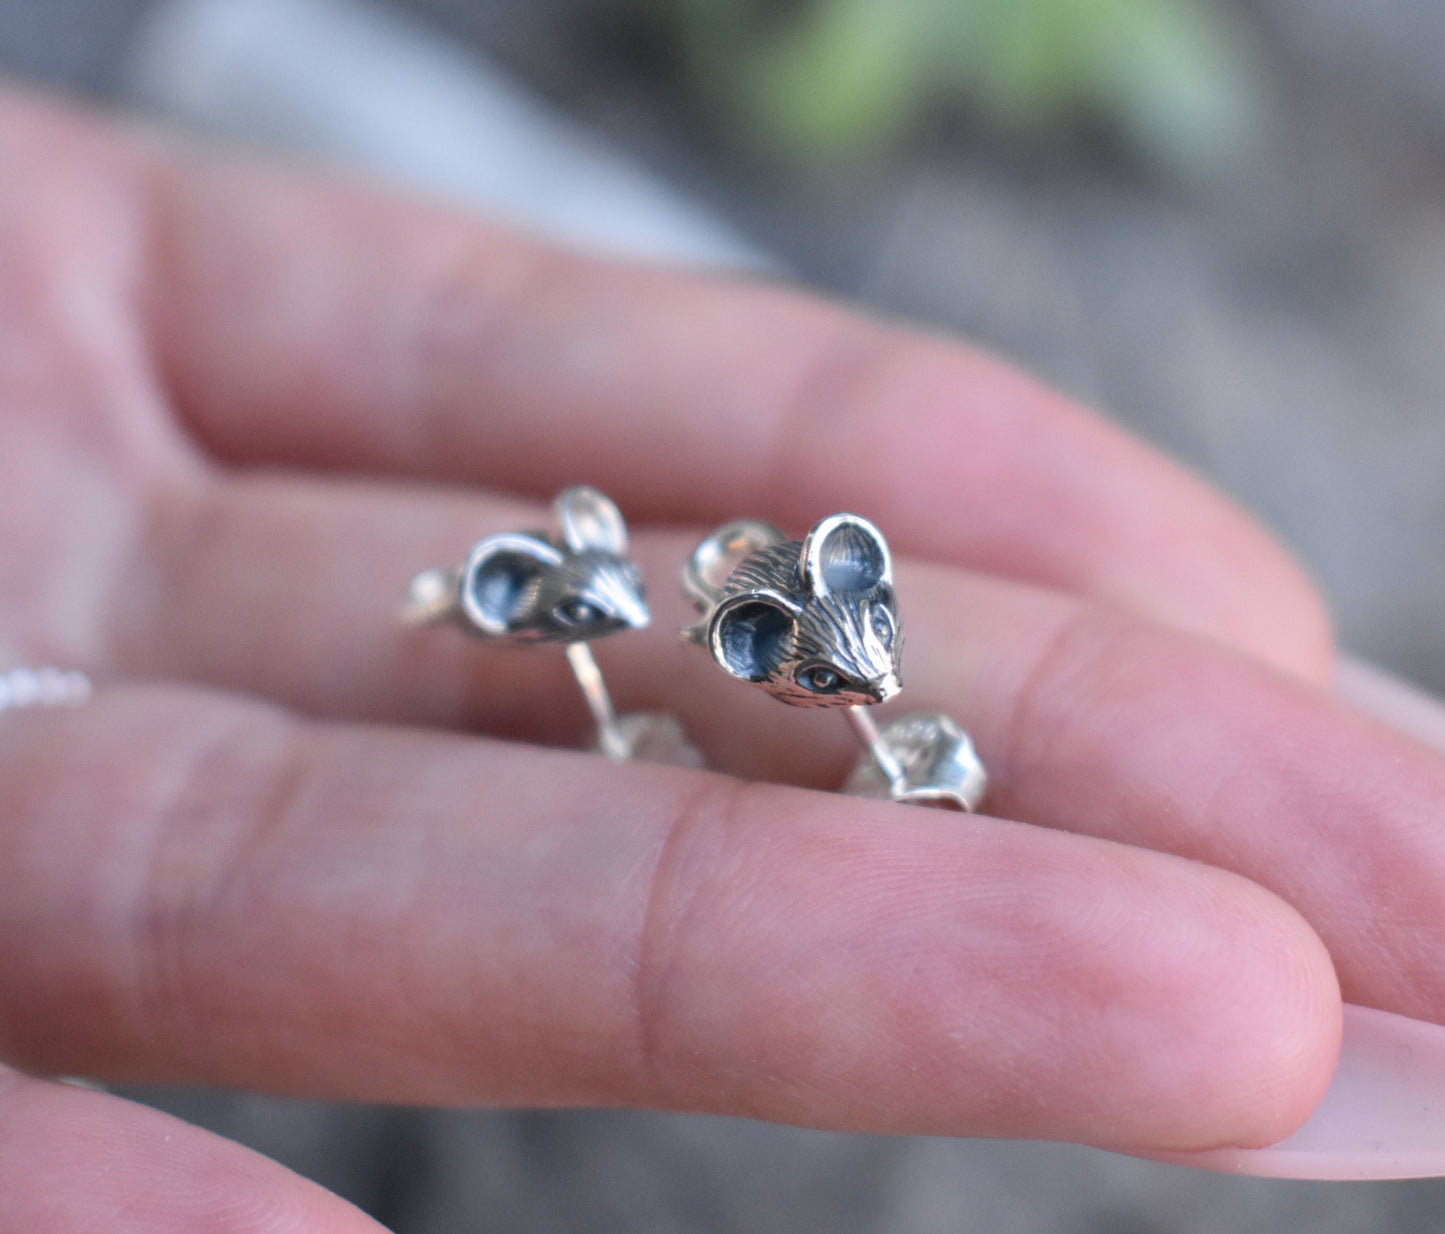 Mouse Earrings- Mouse Studs, Mouse Jewelry, Pet Mouse-Sterling Silver Earrings